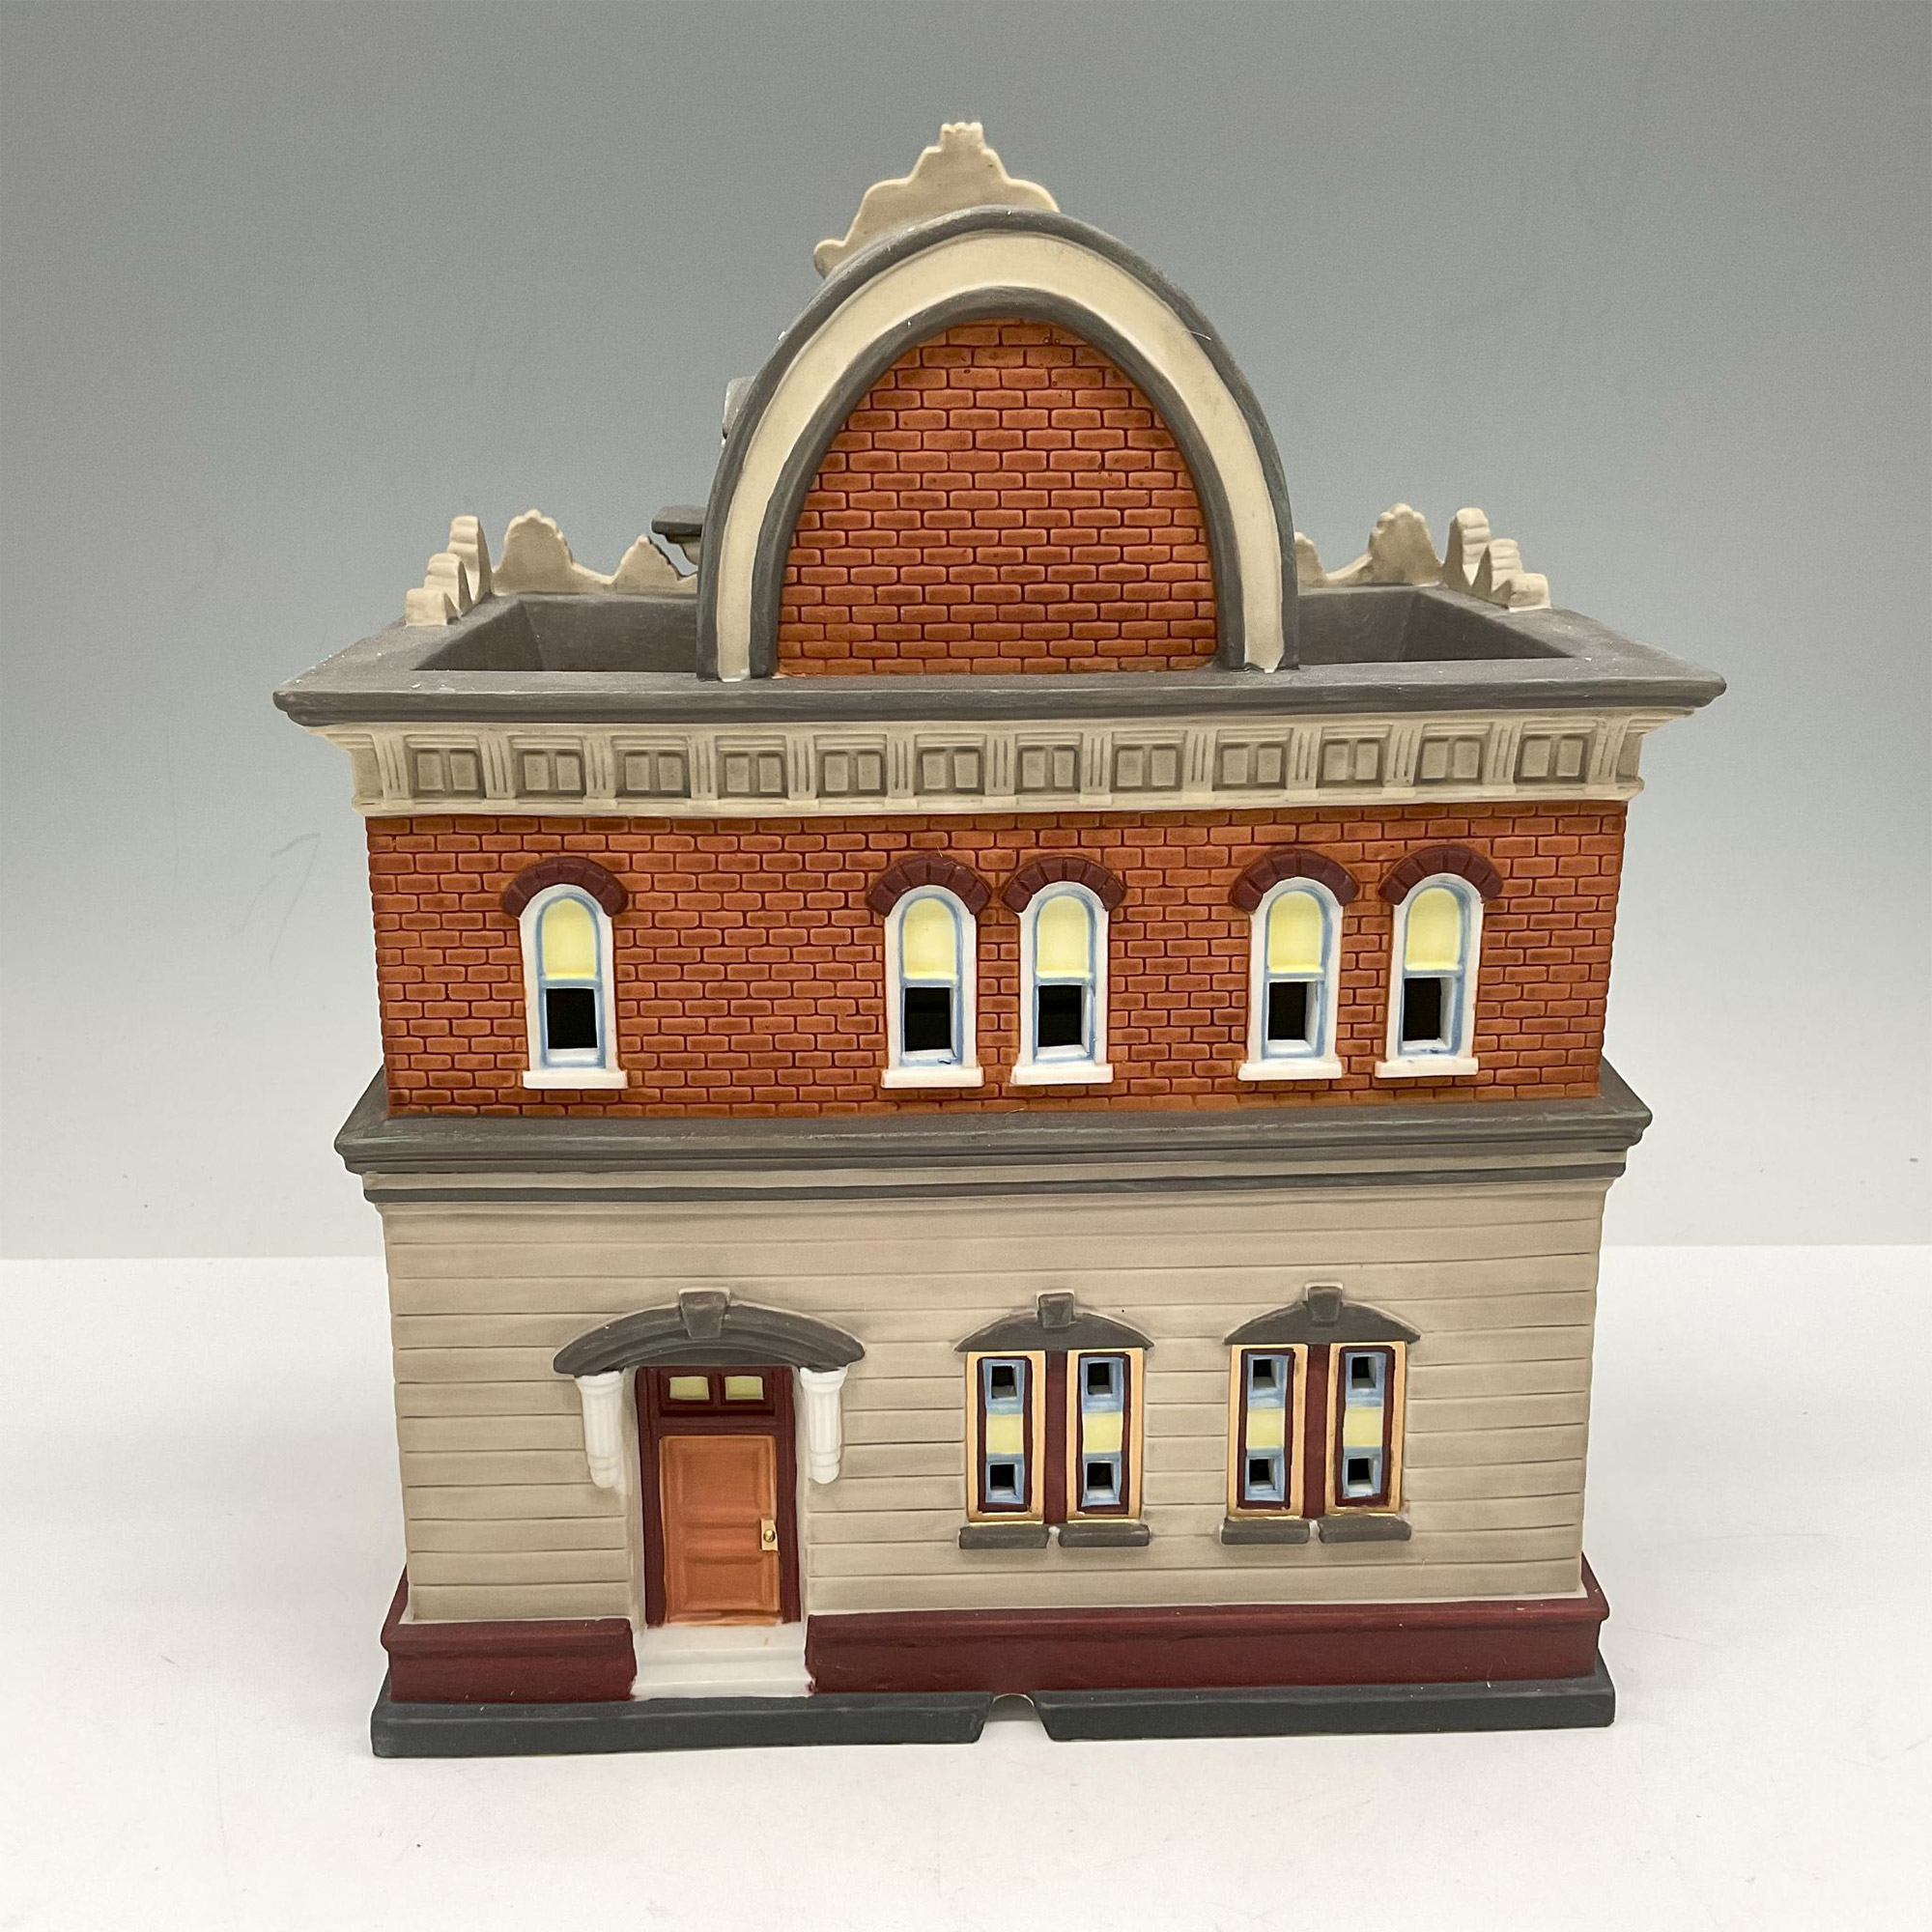 Department 56 Porcelain The Monte Carlo Casino - Image 3 of 6